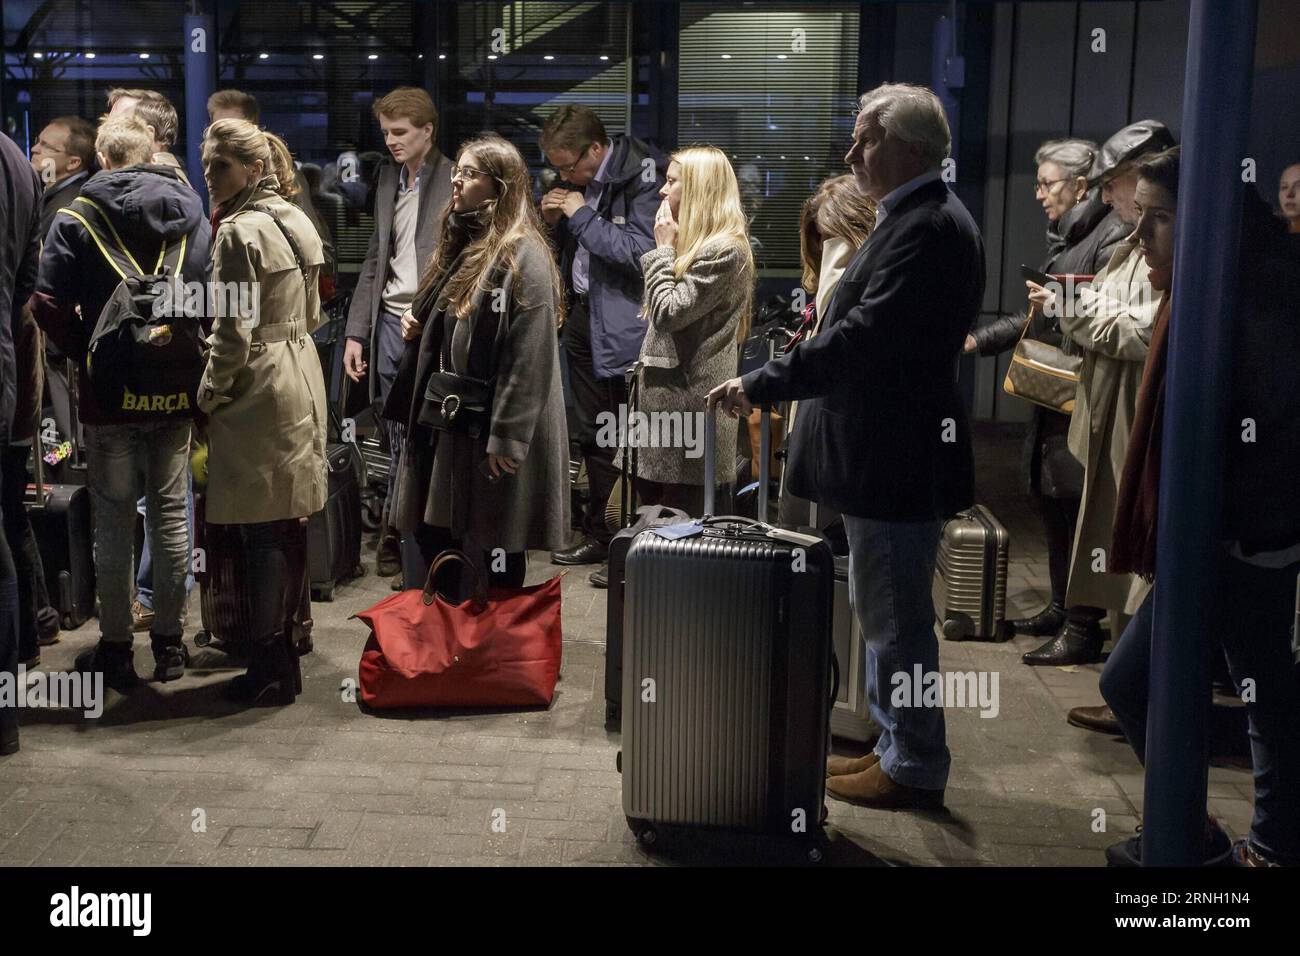 London City Airport evakuiert Passengers wait outside London City Airport after it was reopened following an evacuation due to a suspected chemical incident, in London, Britain on Oct. 21, 2016. The London City Airport has reopened after 27 people were treated and two taken to hospital in a chemical incident . ) BRITAIN-LONDON-CITY AIRPORT-EVACUATION-REOPEN TimxIreland PUBLICATIONxNOTxINxCHN   London City Airport evacuated Passengers Wait outside London City Airport After IT what reopened following to Evacuation Due to a suspected Chemical INCIDENT in London Britain ON OCT 21 2016 The London C Stock Photo